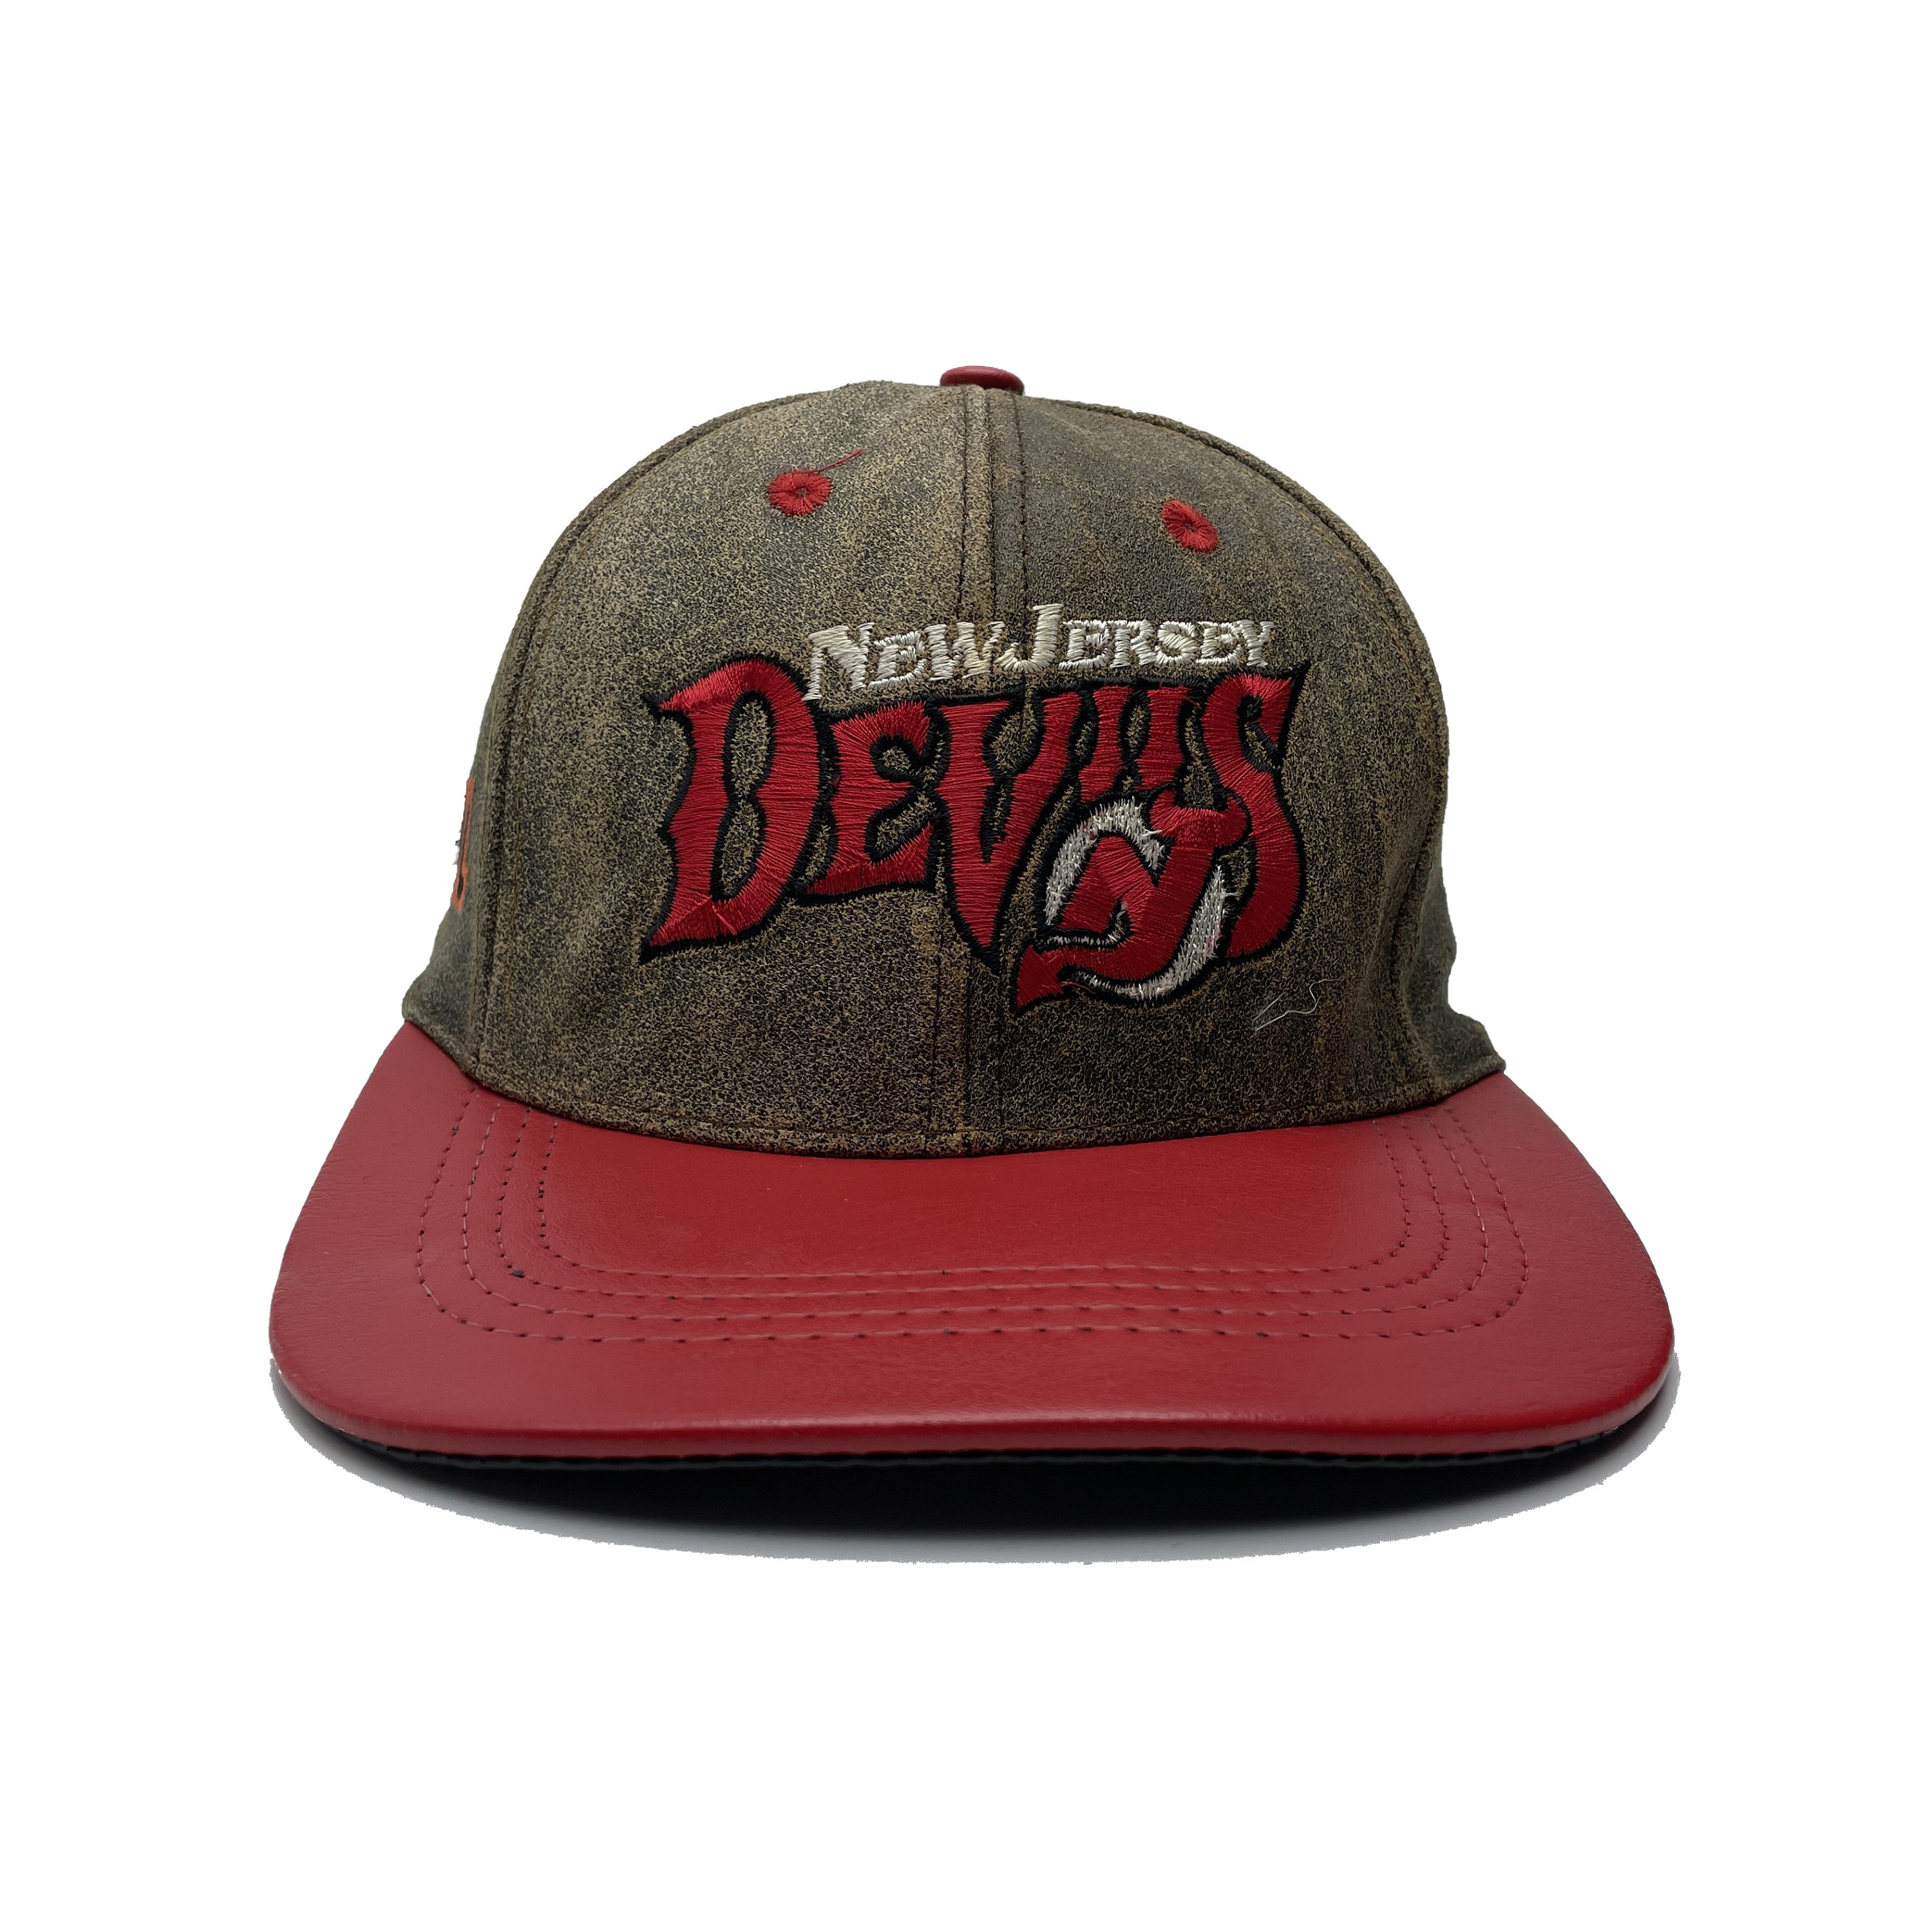 Vintage 90's New Jersey Devils Zephyr Hat Cap SnapBack Wool NHL One-Size  Red